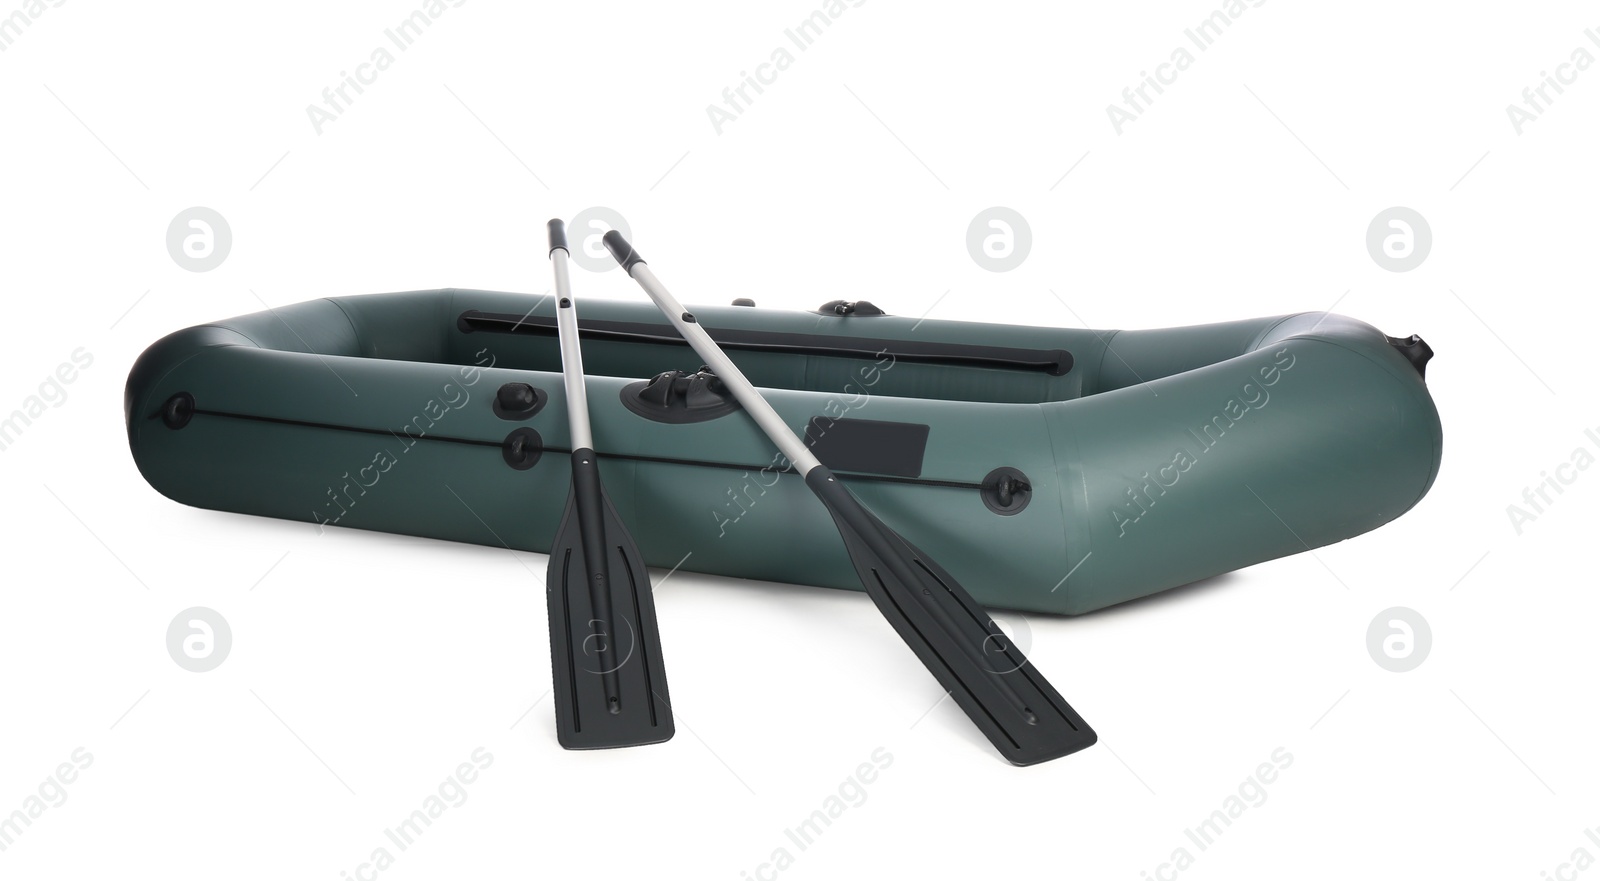 Photo of Inflatable rubber fishing boat with aluminium oars isolated on white